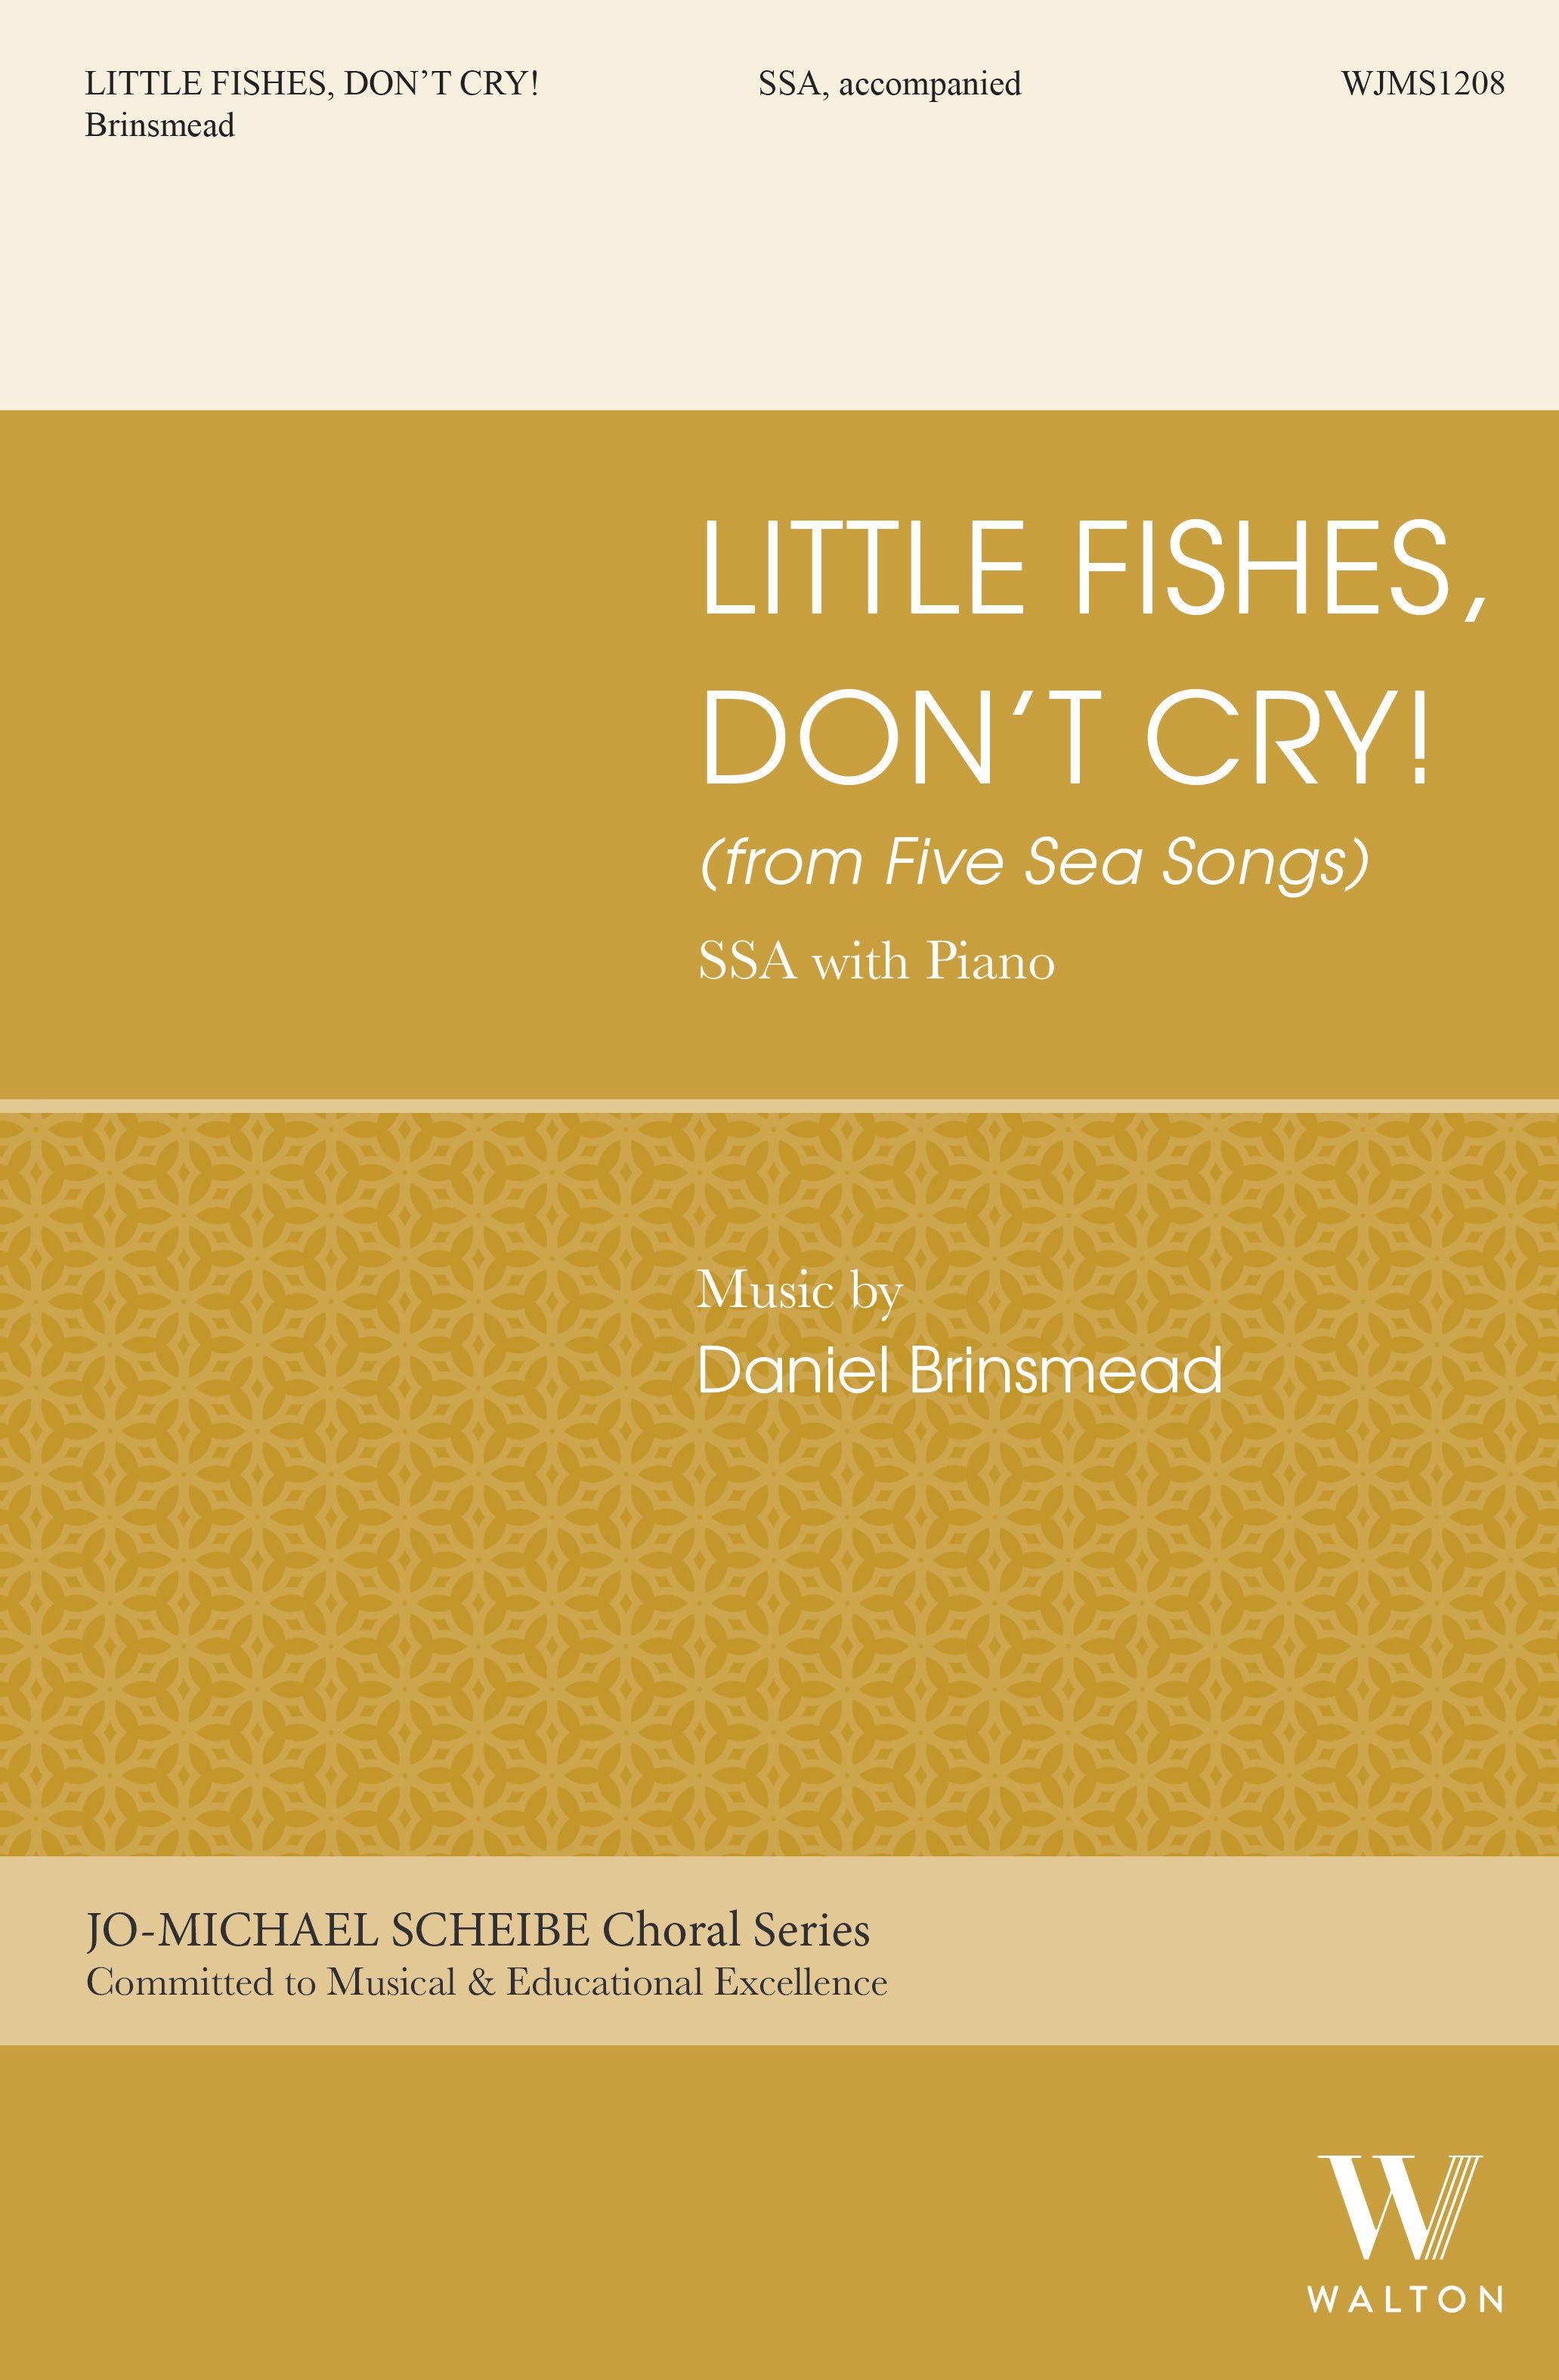 Little Fishes, Don't Cry! community sheet music cover